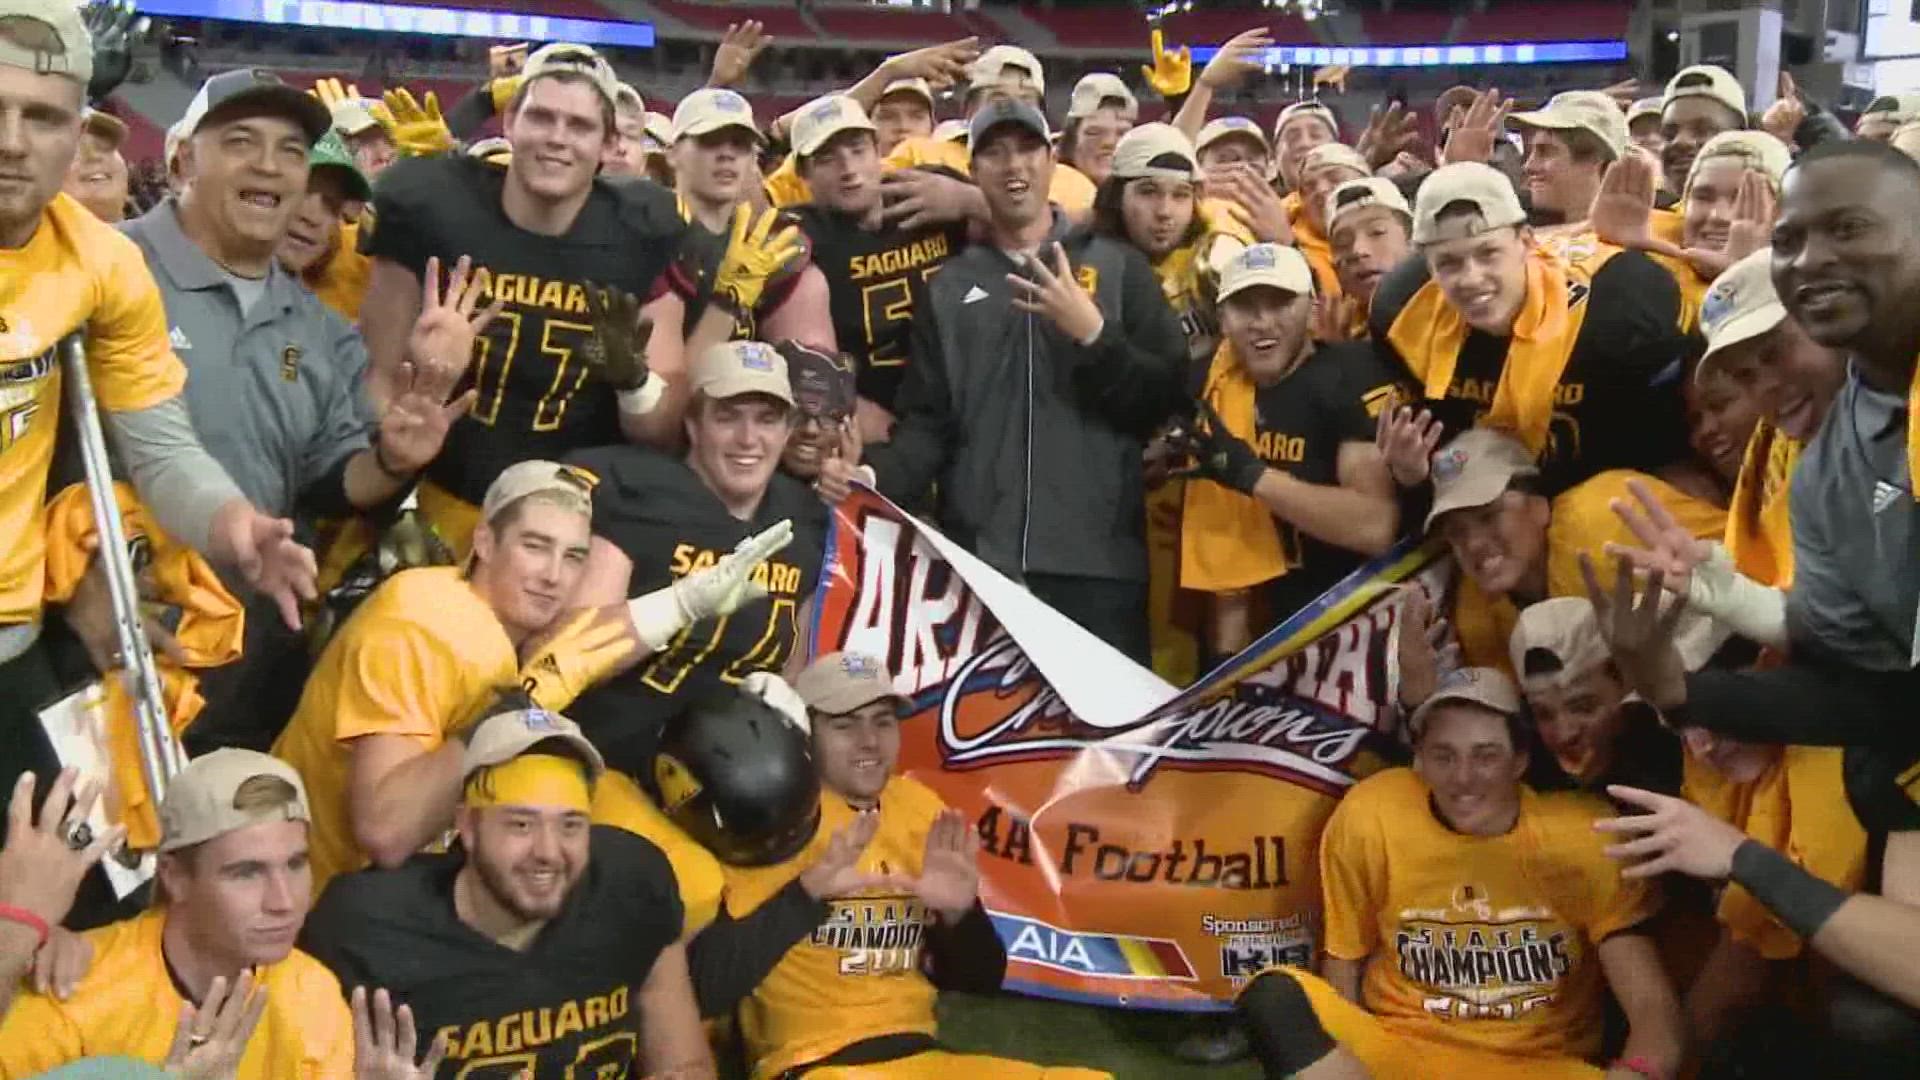 Head coach Jason Mohns announced earlier that he will be leaving Saguaro to coach tight ends at ASU.